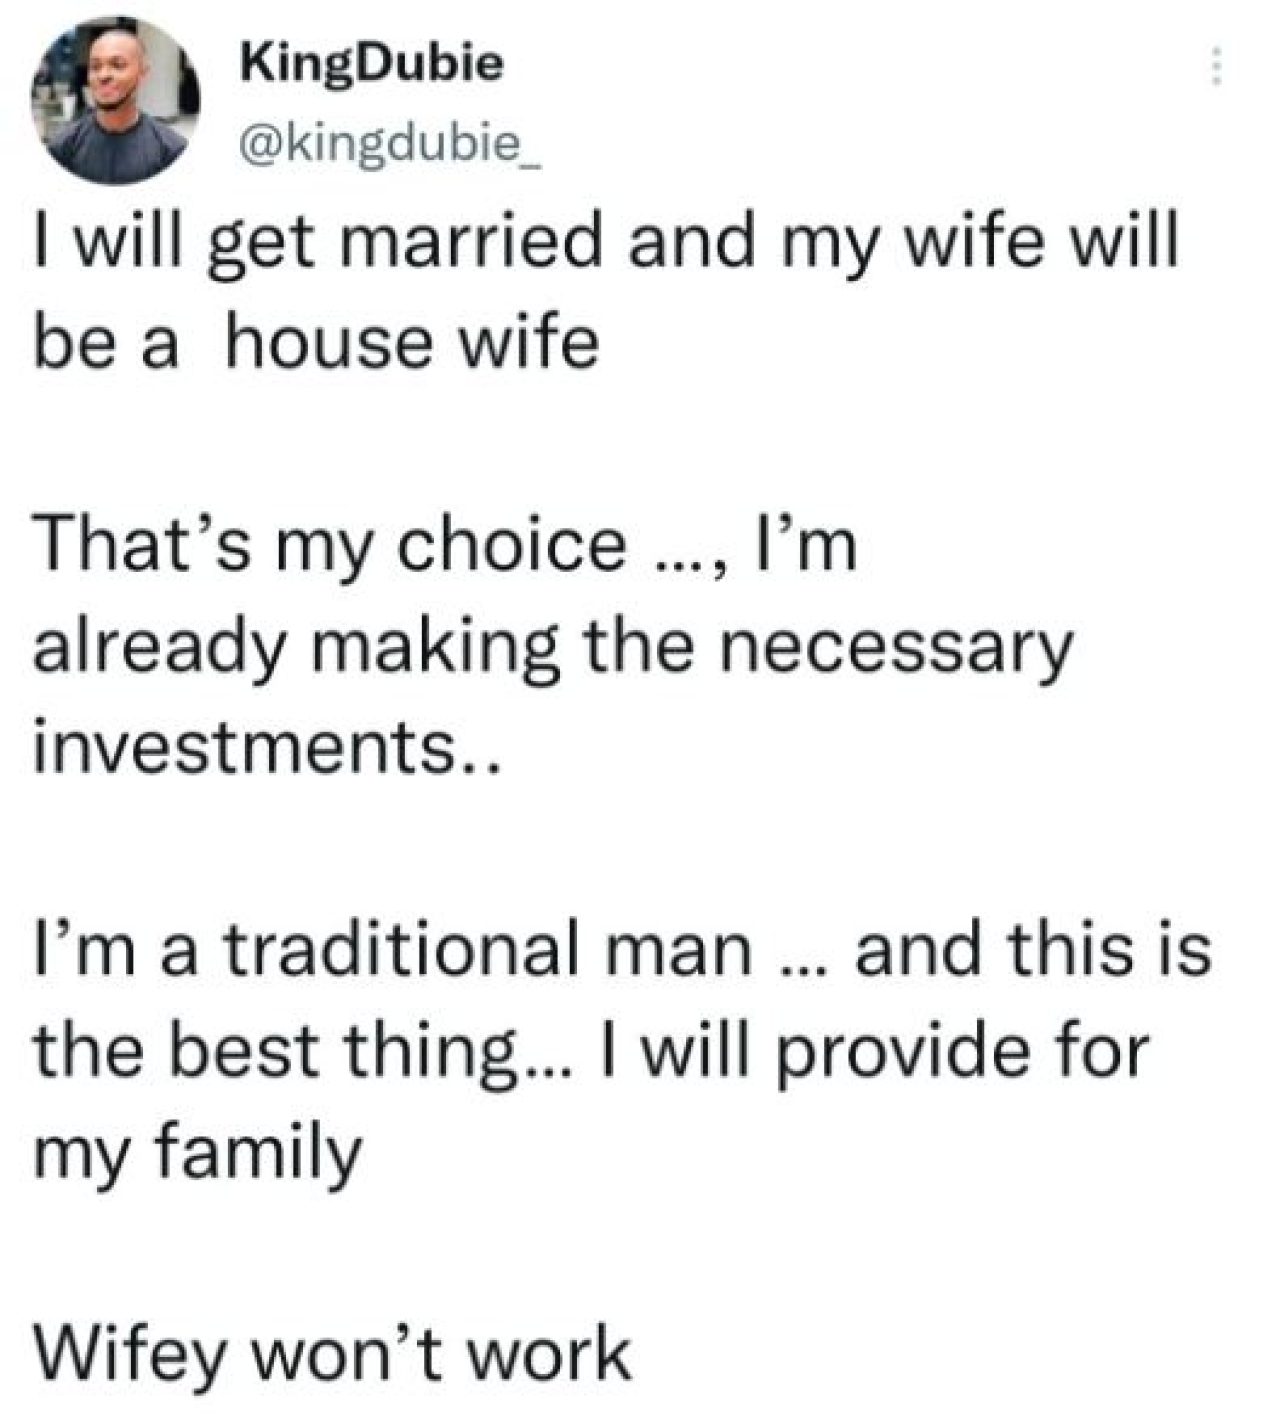 "A happy home with happy children should be the goal of women" Man vows to never permit his wife to work AdvertAfrica News on afronewswire.com: Amplifying Africa's Voice | afronewswire.com | Breaking News & Stories